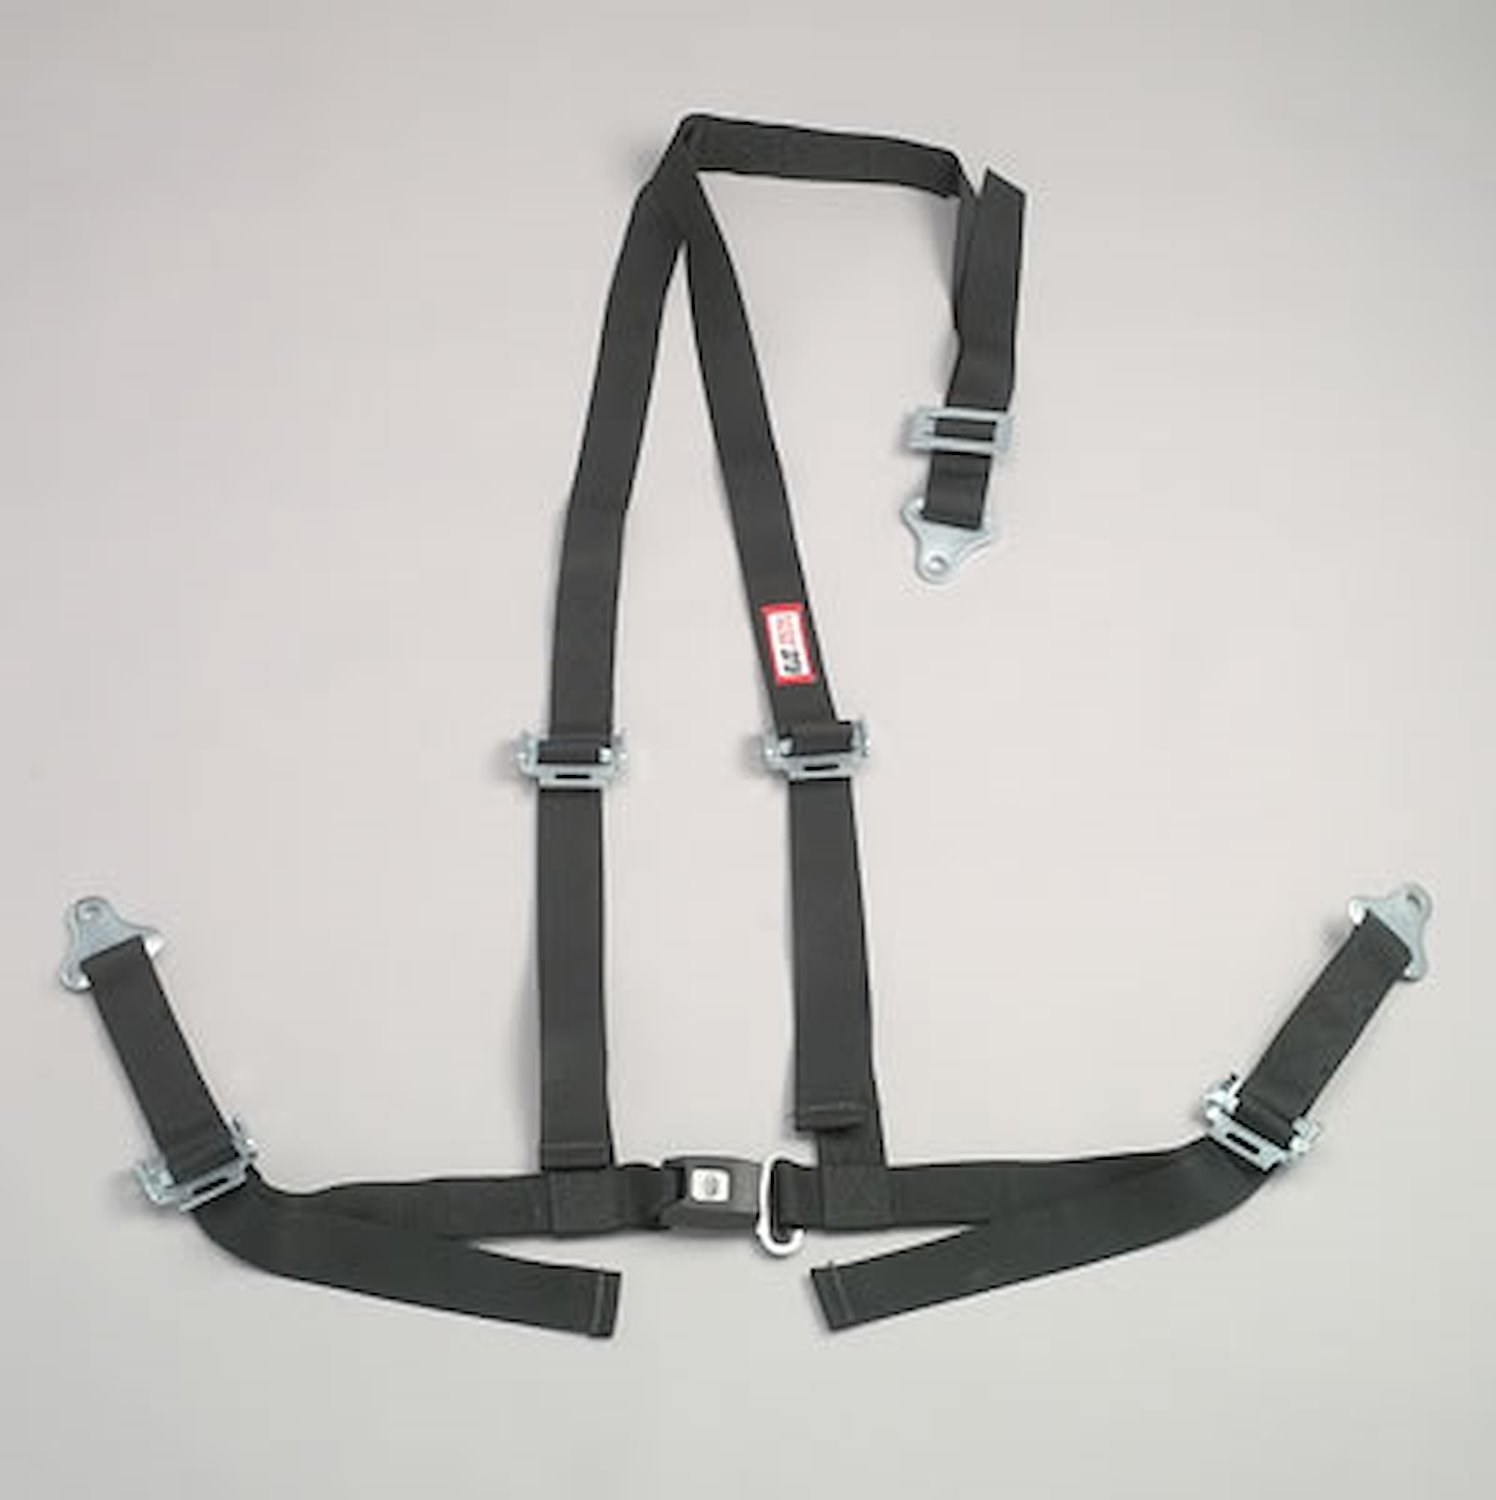 NON-SFI B&T HARNESS 2 PULL UP Lap Belt 2 S. H. Y FLOOR Mount ALL WRAP ENDS ORANGE